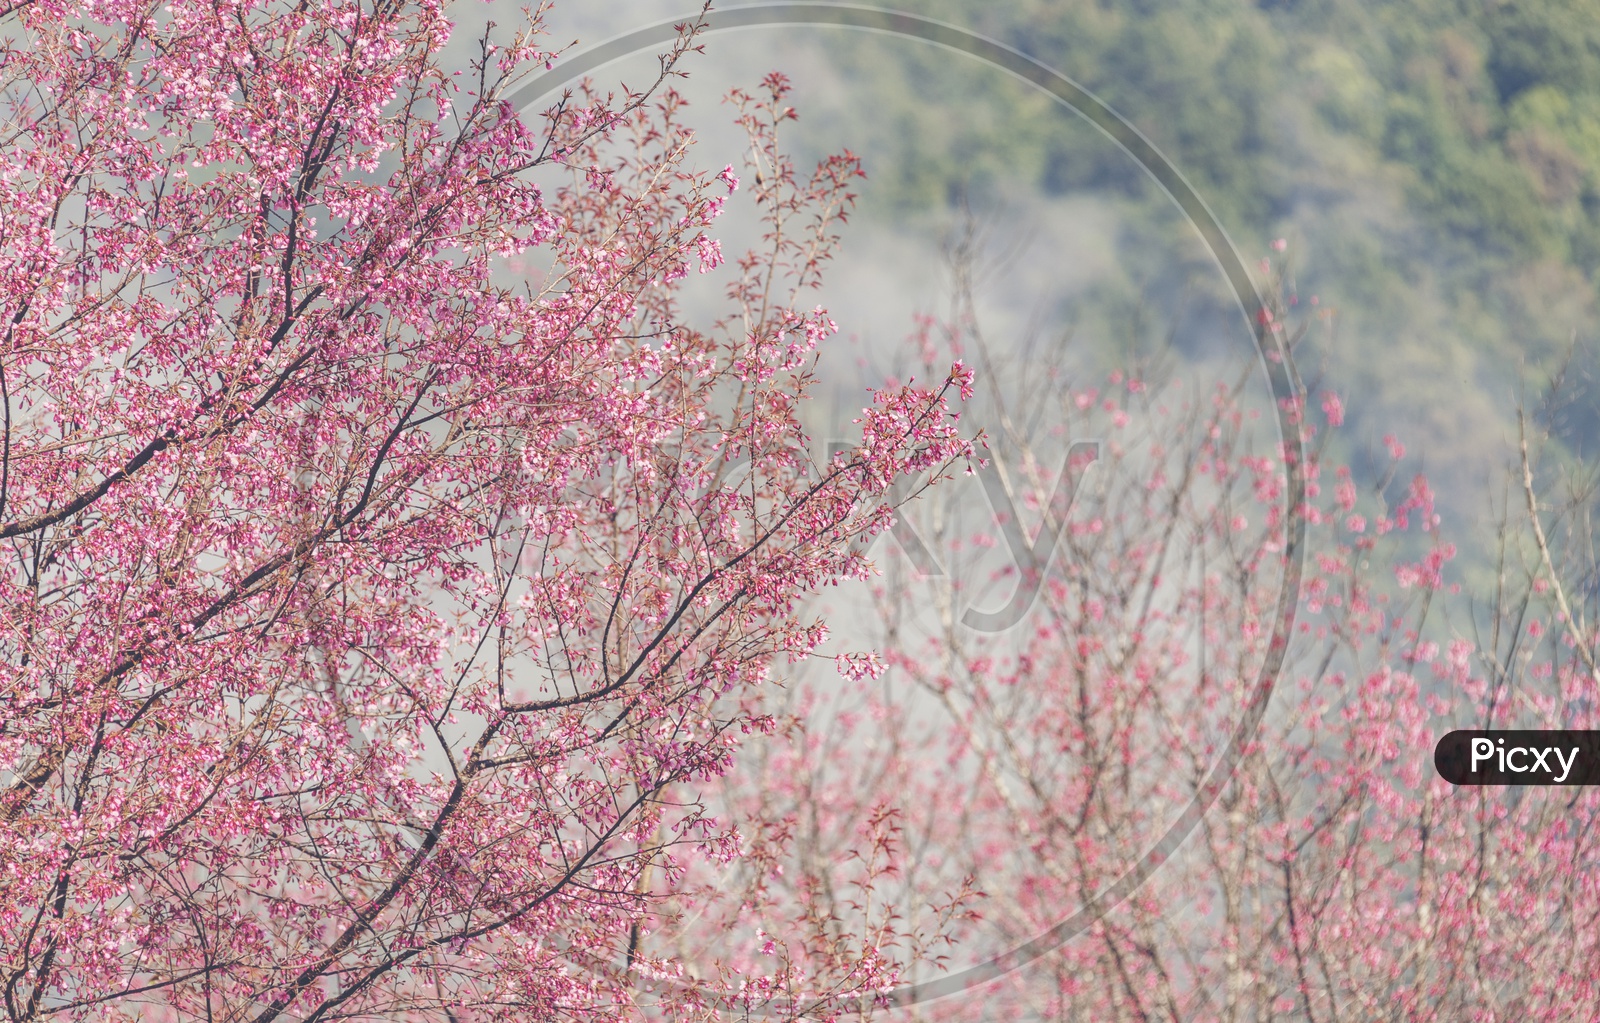 Branches of each tree with pink flowers